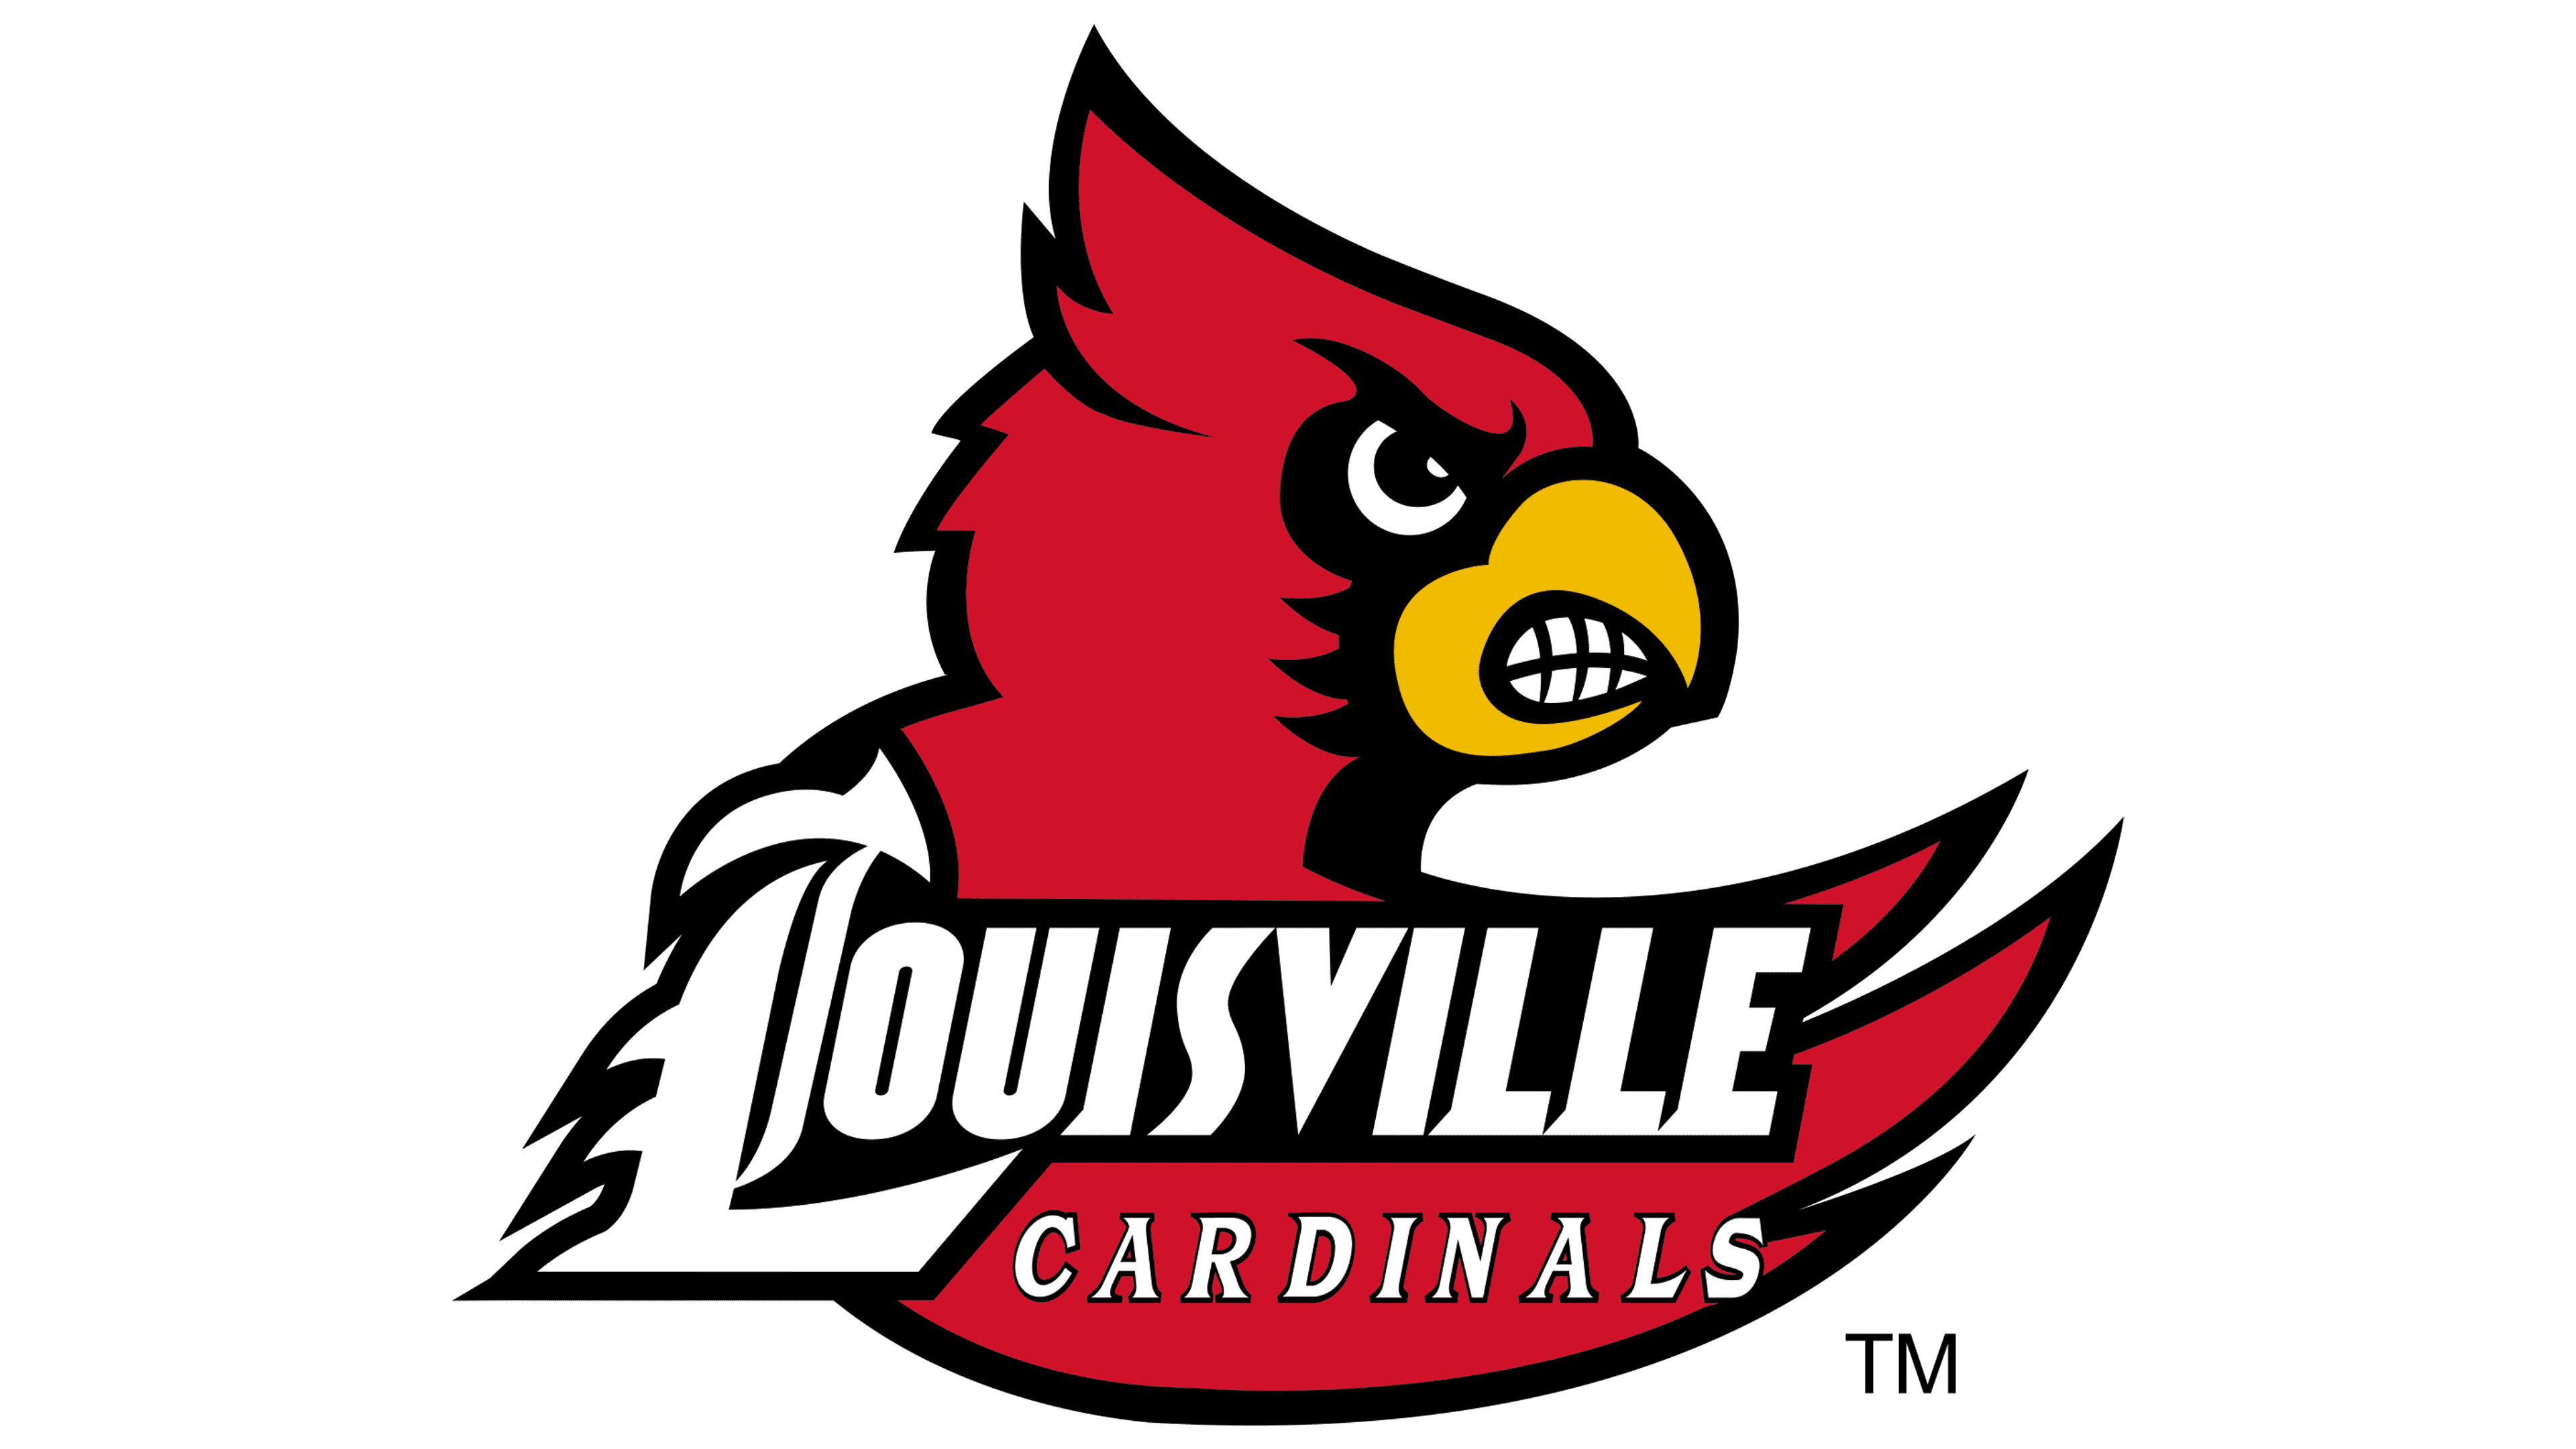 Johnson City Cardinals Logo and symbol, meaning, history, PNG, brand